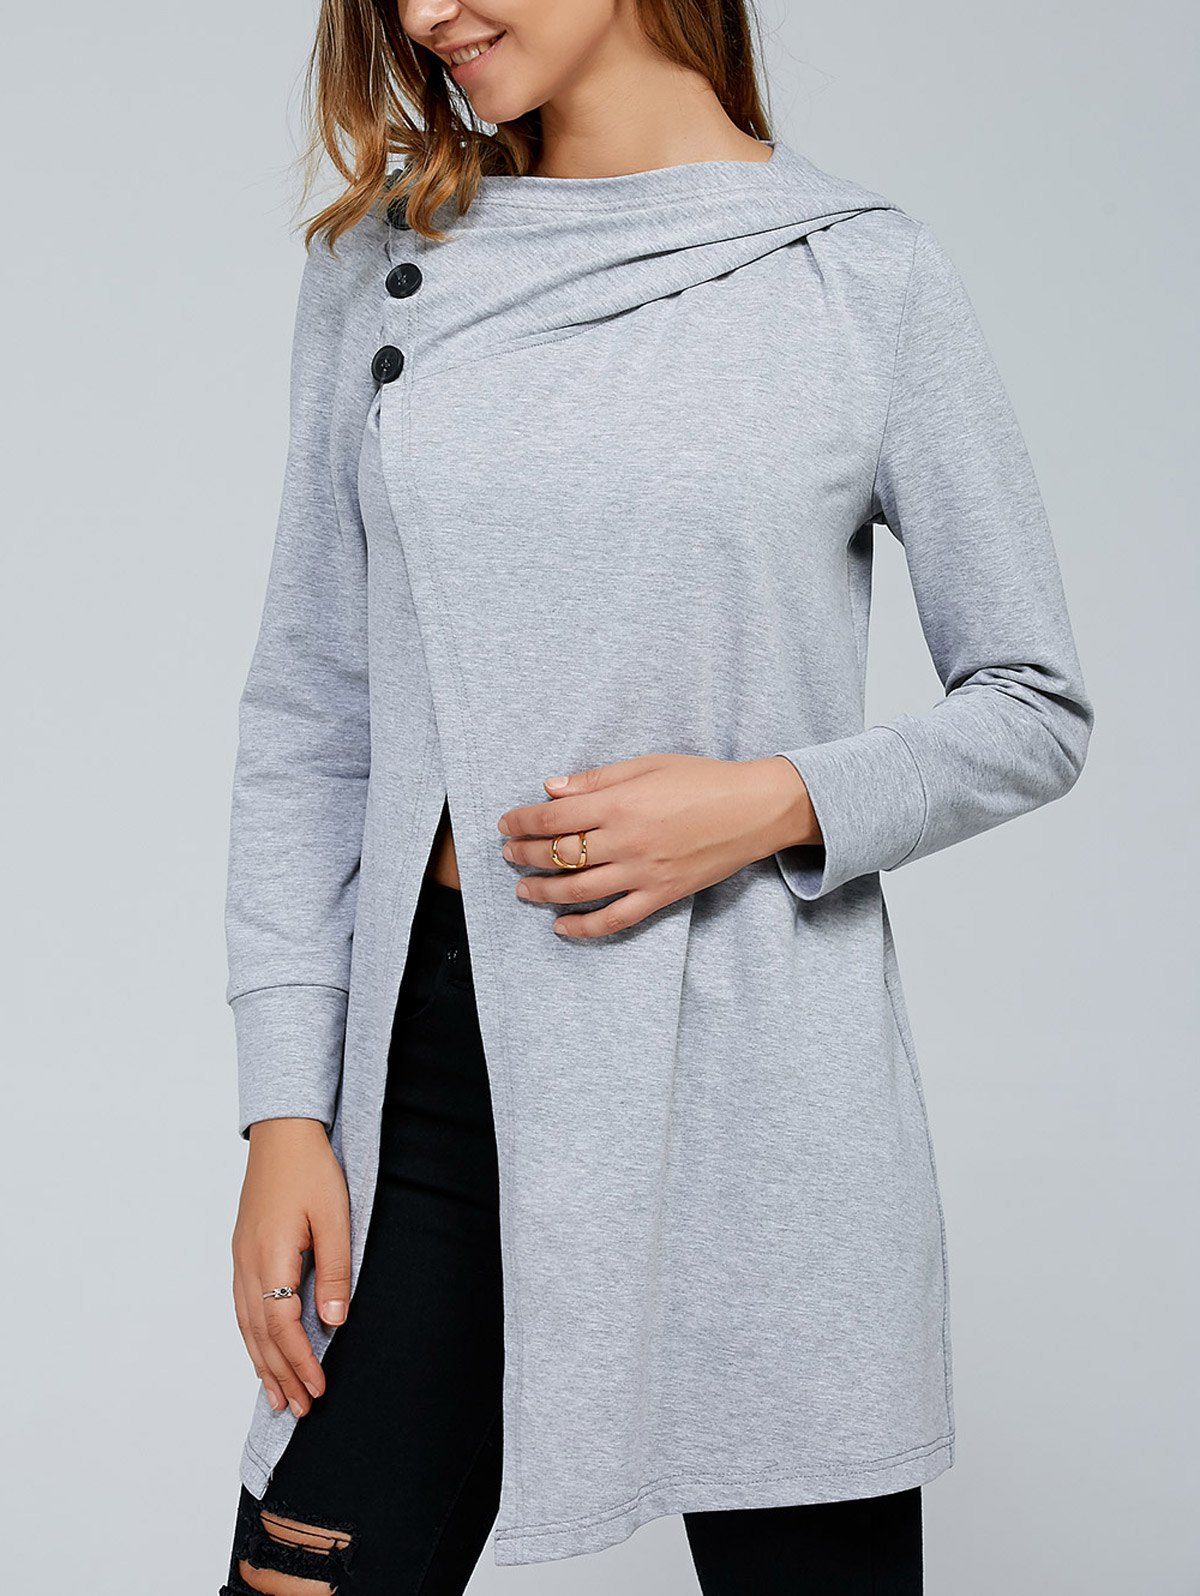 Inclined Button Front Slit Hoodie - LIGHT GRAY XL